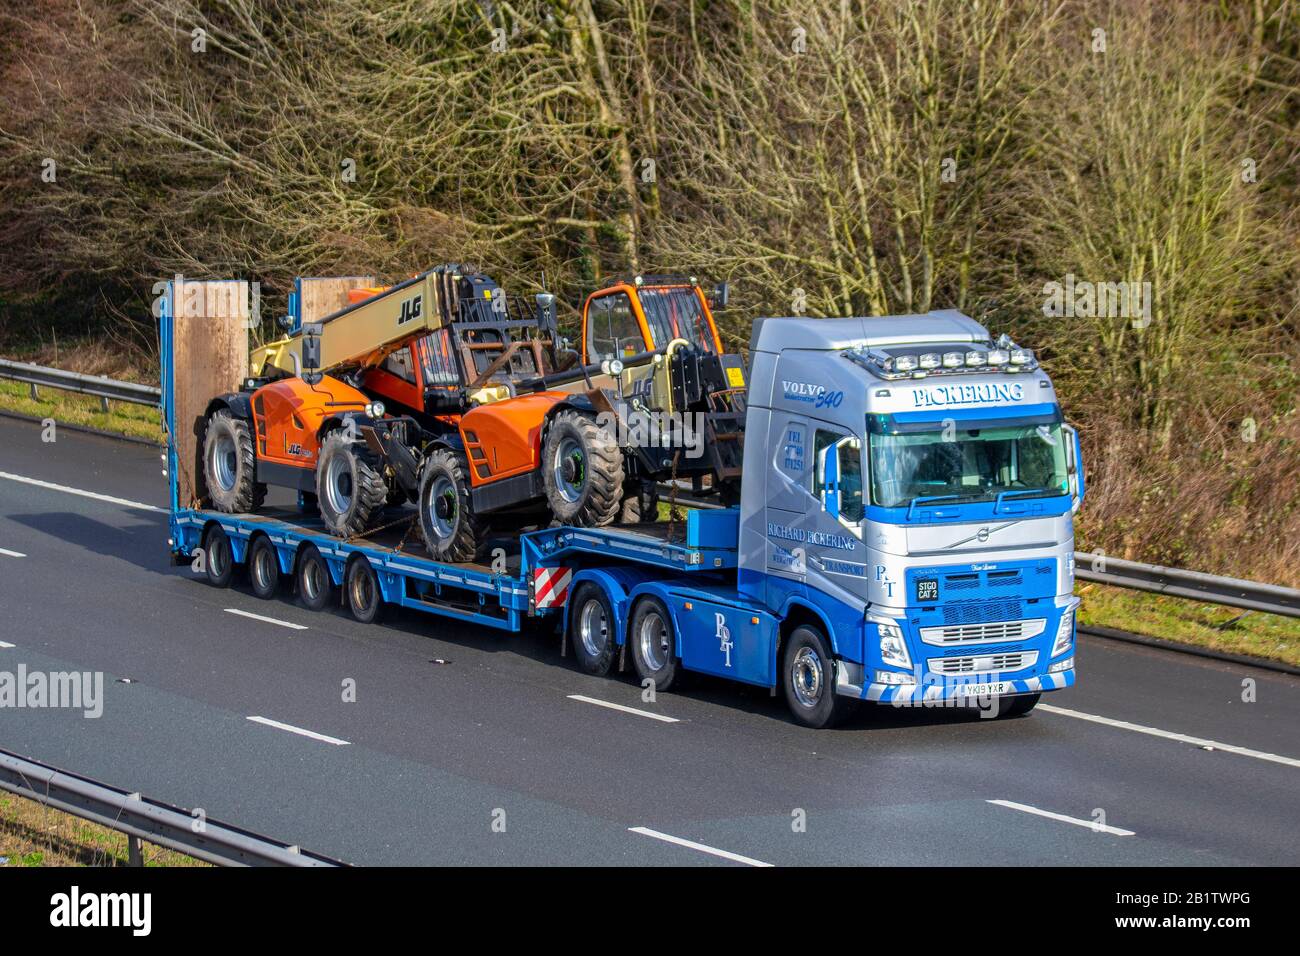 Richard Pickering Haulage delivery trucks, lorry, transportation, truck, cargo carrier, VOLVO FH540 Trucks, articulated Volvo vehicle, European commercial transport, plant & equipment for construction industry, M6 at Manchester, UK Stock Photo